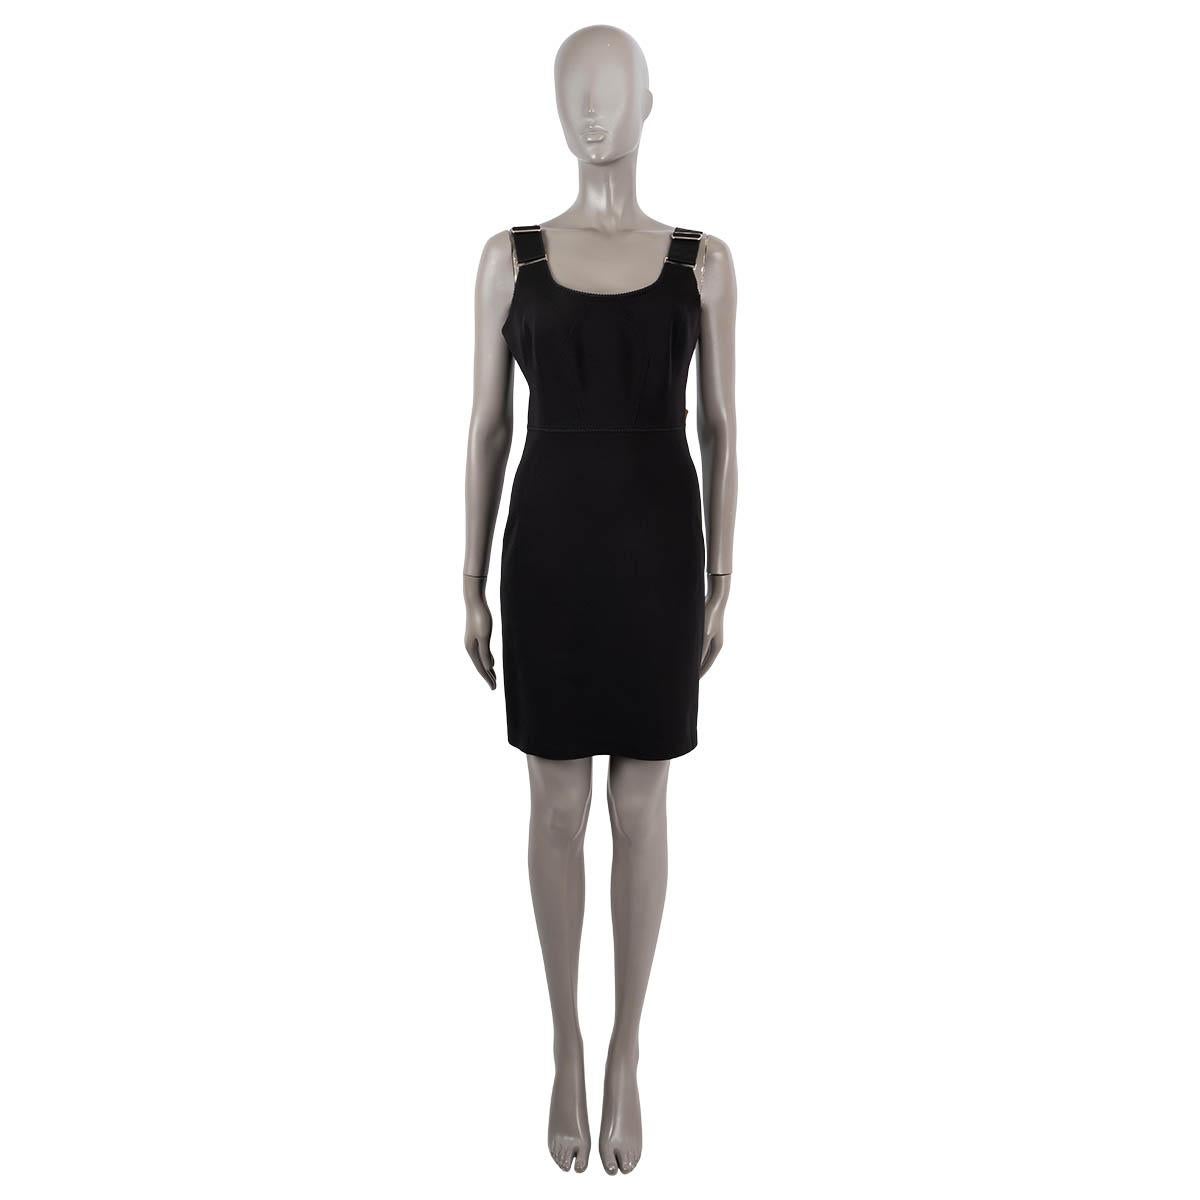 100% authentic Louis Vuitton sleeveless sheath dress in black polyamide (72%) and elastane (28%) - please note the content tag is missing. Features adjustable straps in monogram print. Opens with a zipper in the back. Unlined. Has been worn and is